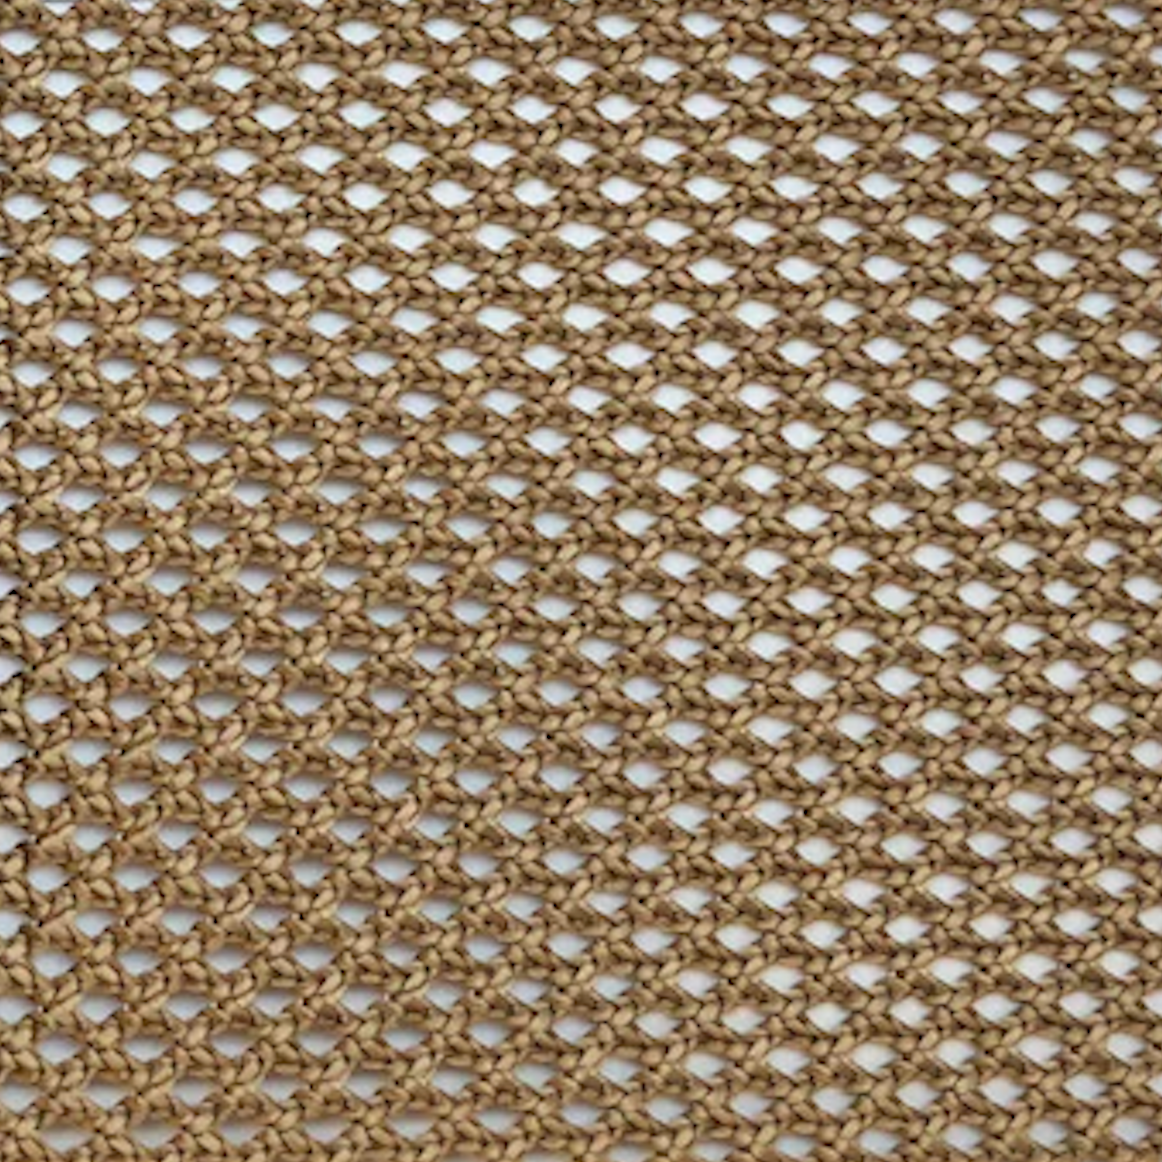 Metallic Mesh Two Way Stretch Mesh Fabric Sold by the Yard -  Norway